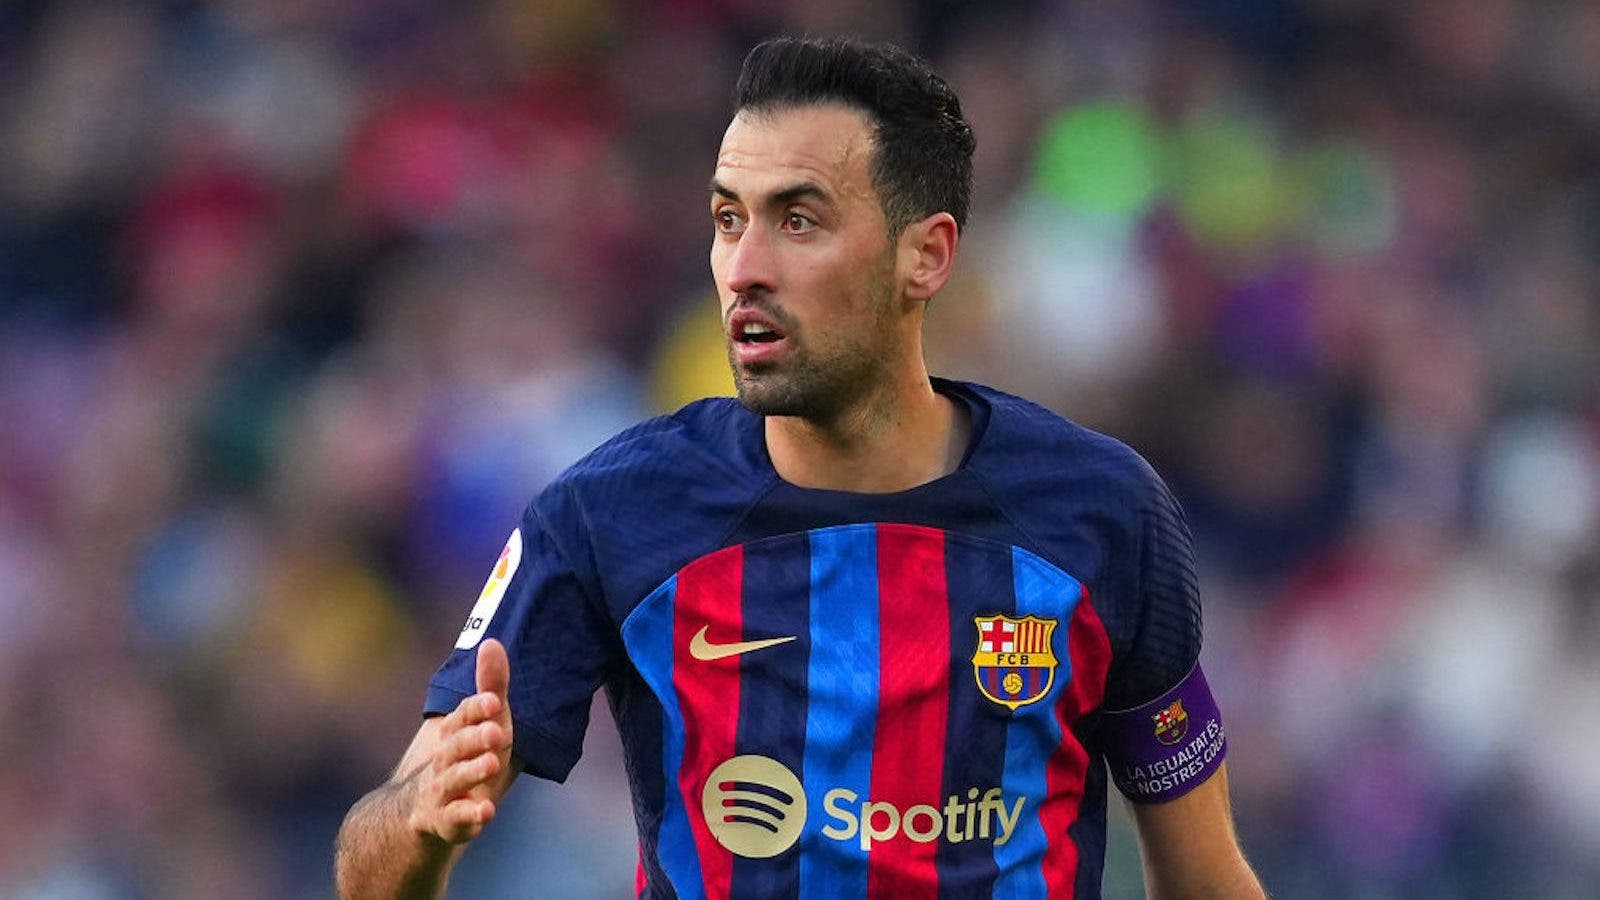 The future busquets that FC Barcelona want
	

